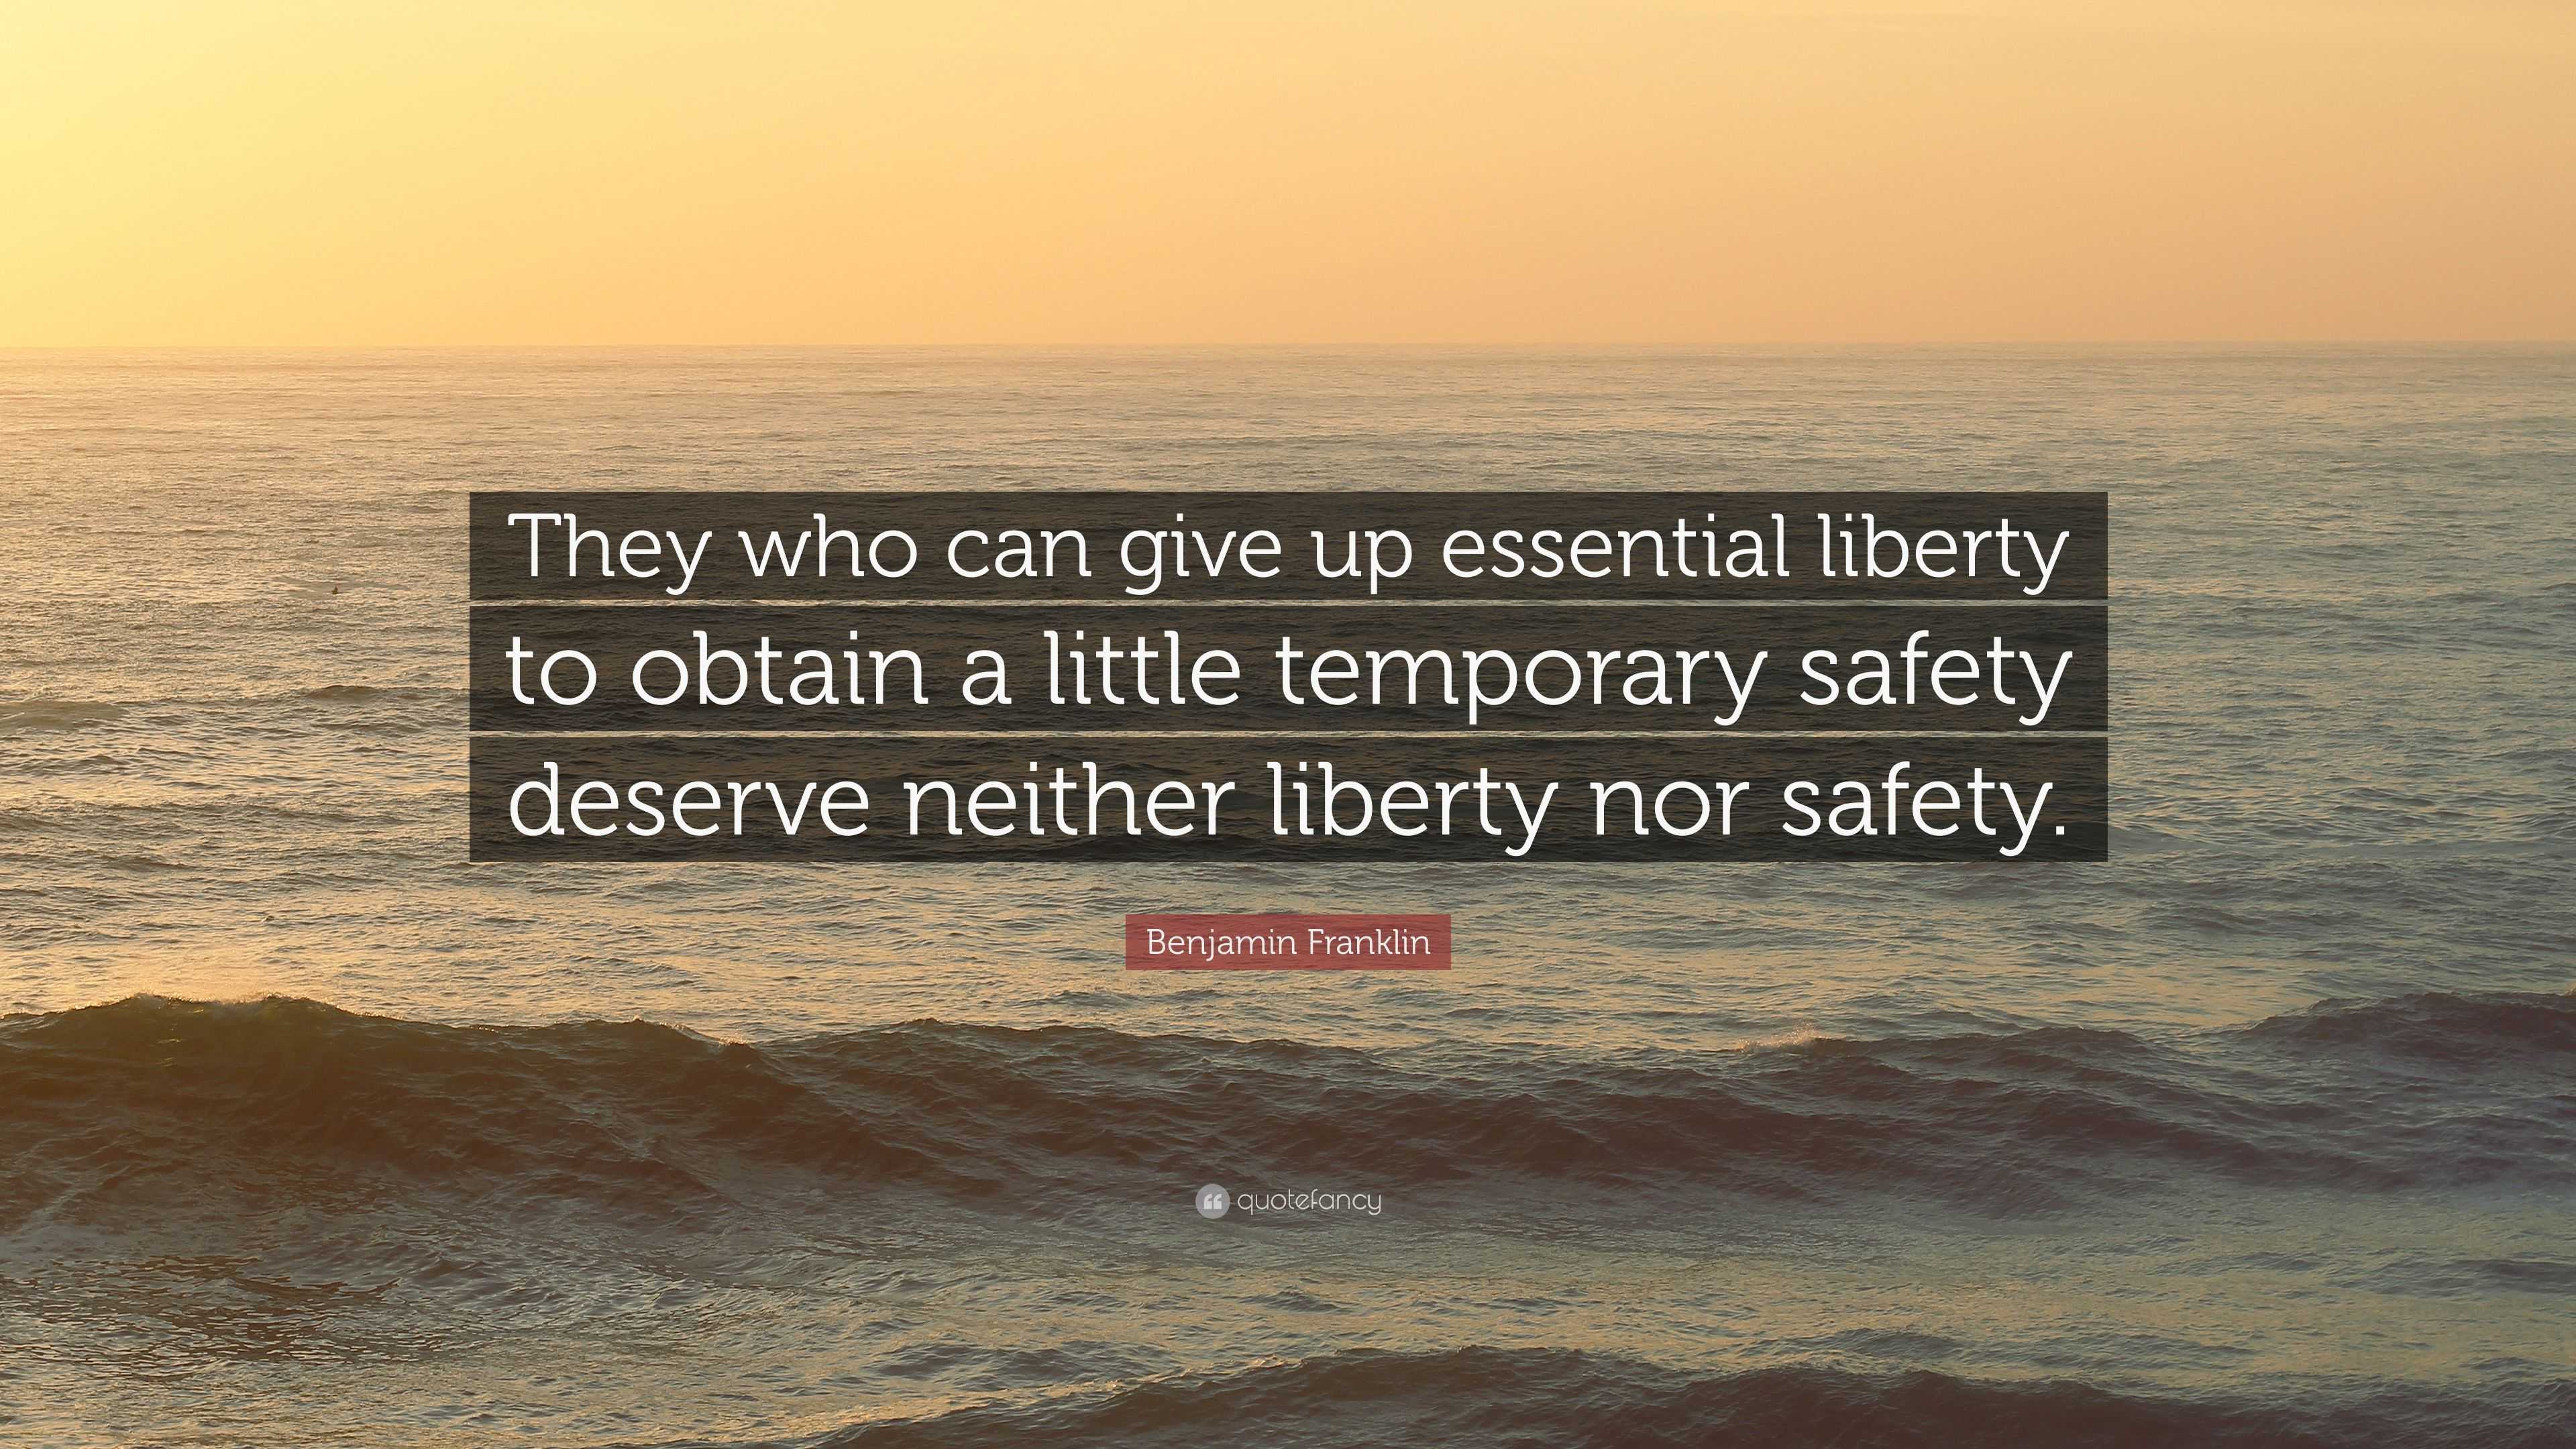 if you give up your freedom for security